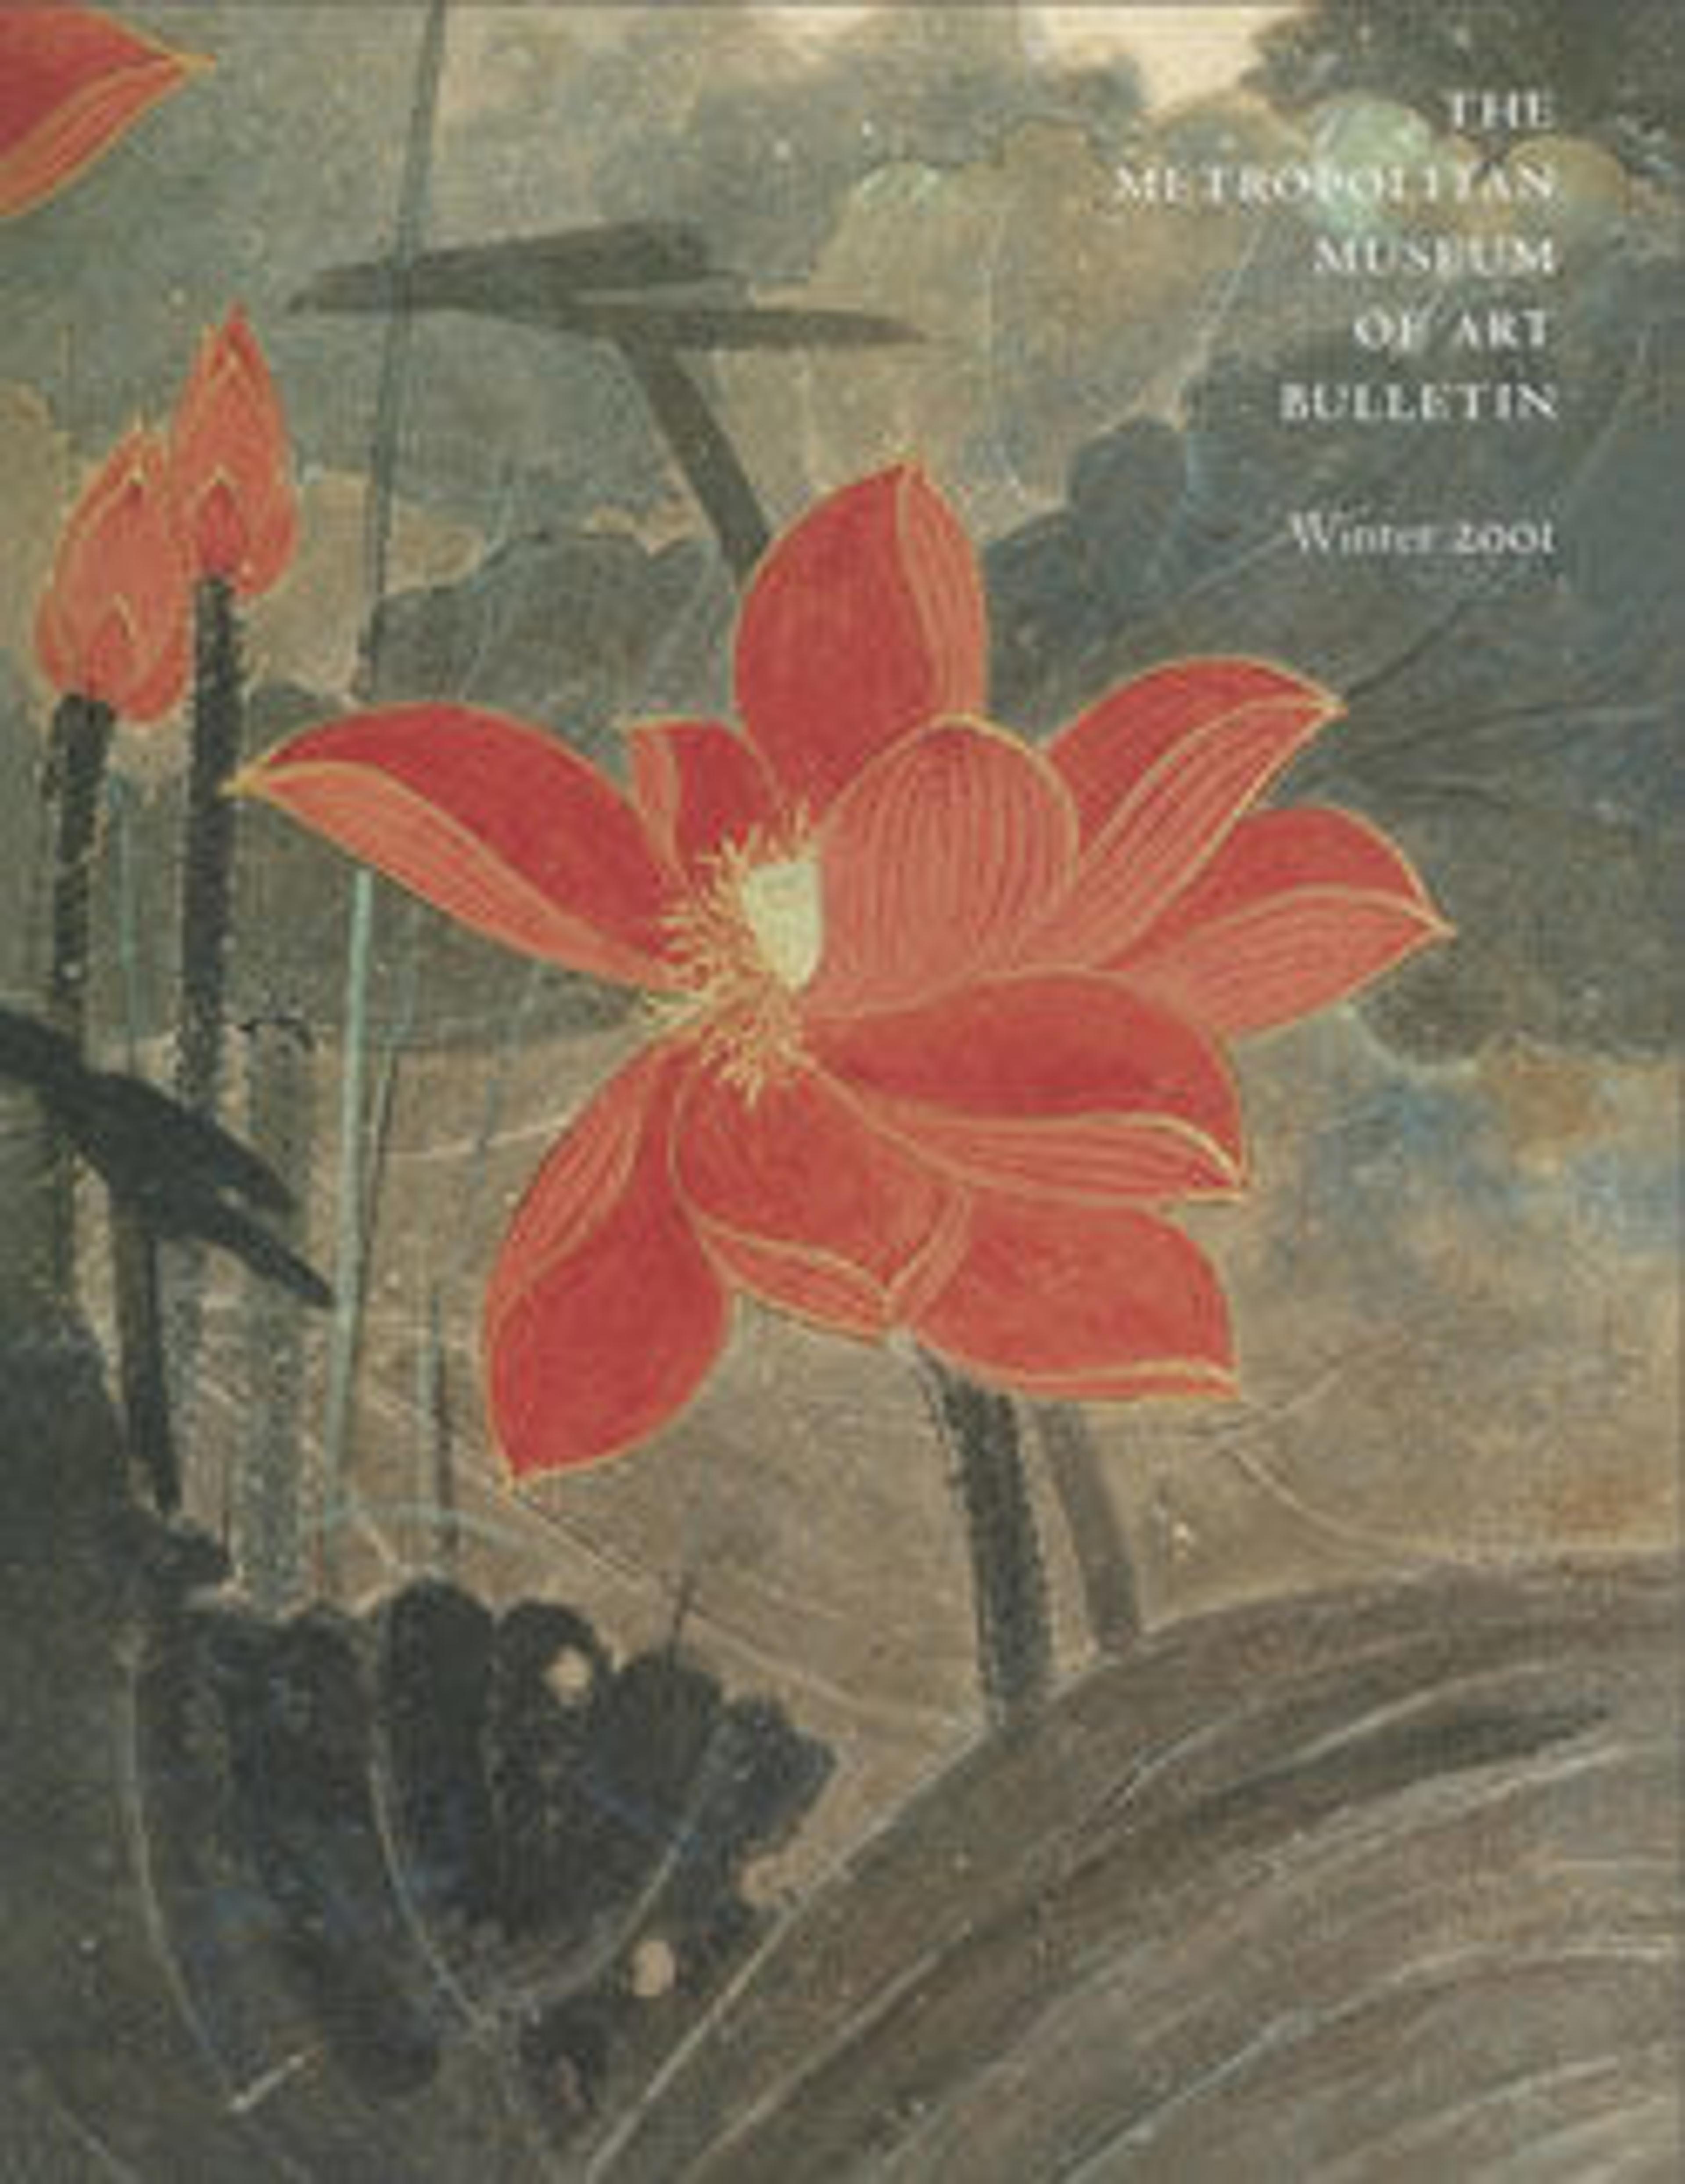 "Modern Chinese Painting, 1860-1980: Selections from the Robert H. Ellsworth Collection in The Metropolitan Museum of Art": The Metropolitan Museum of Art Bulletin, v. 58, no. 3 (Winter, 2001)